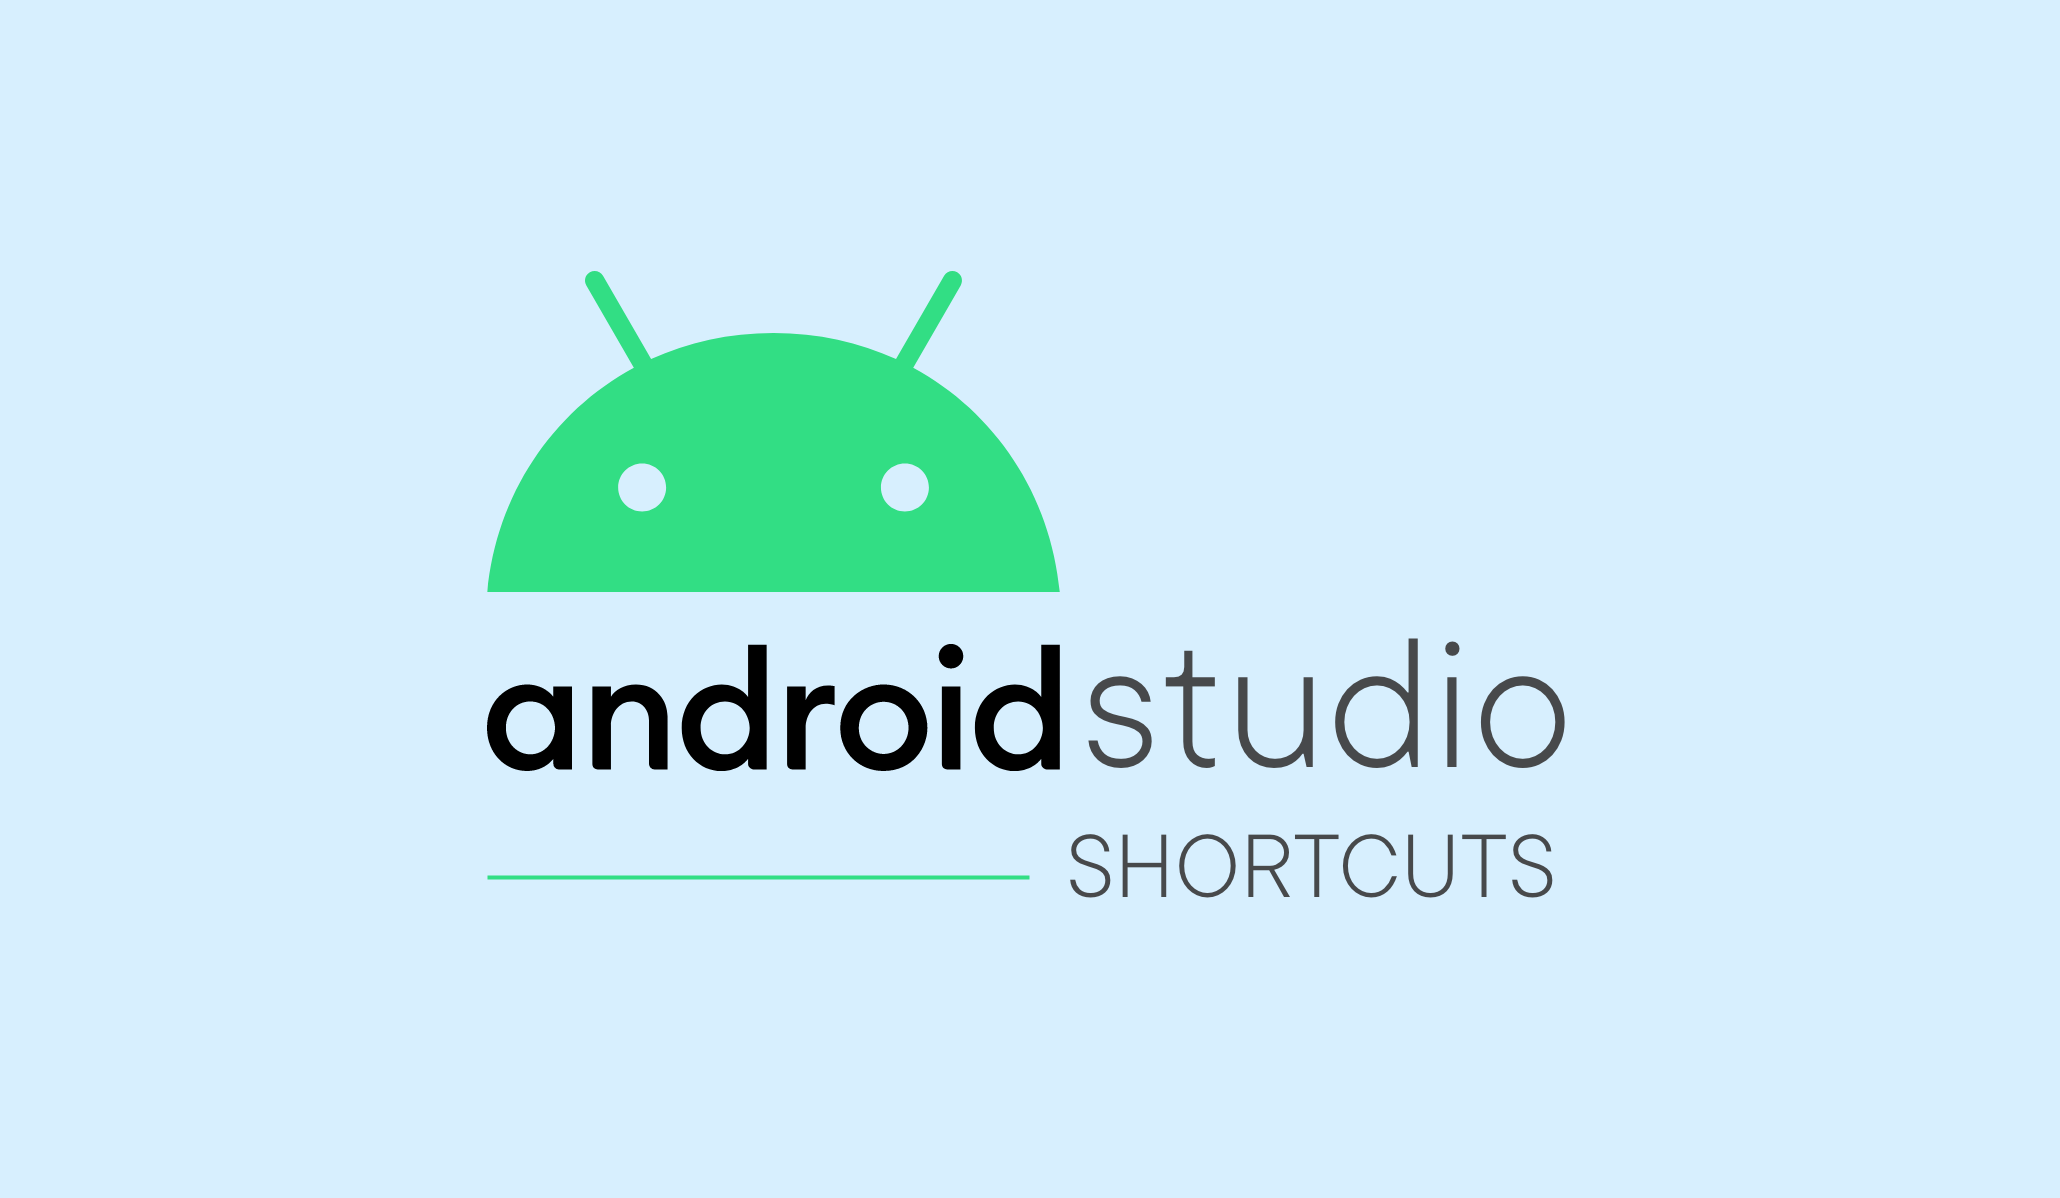 android studio shortcuts Img